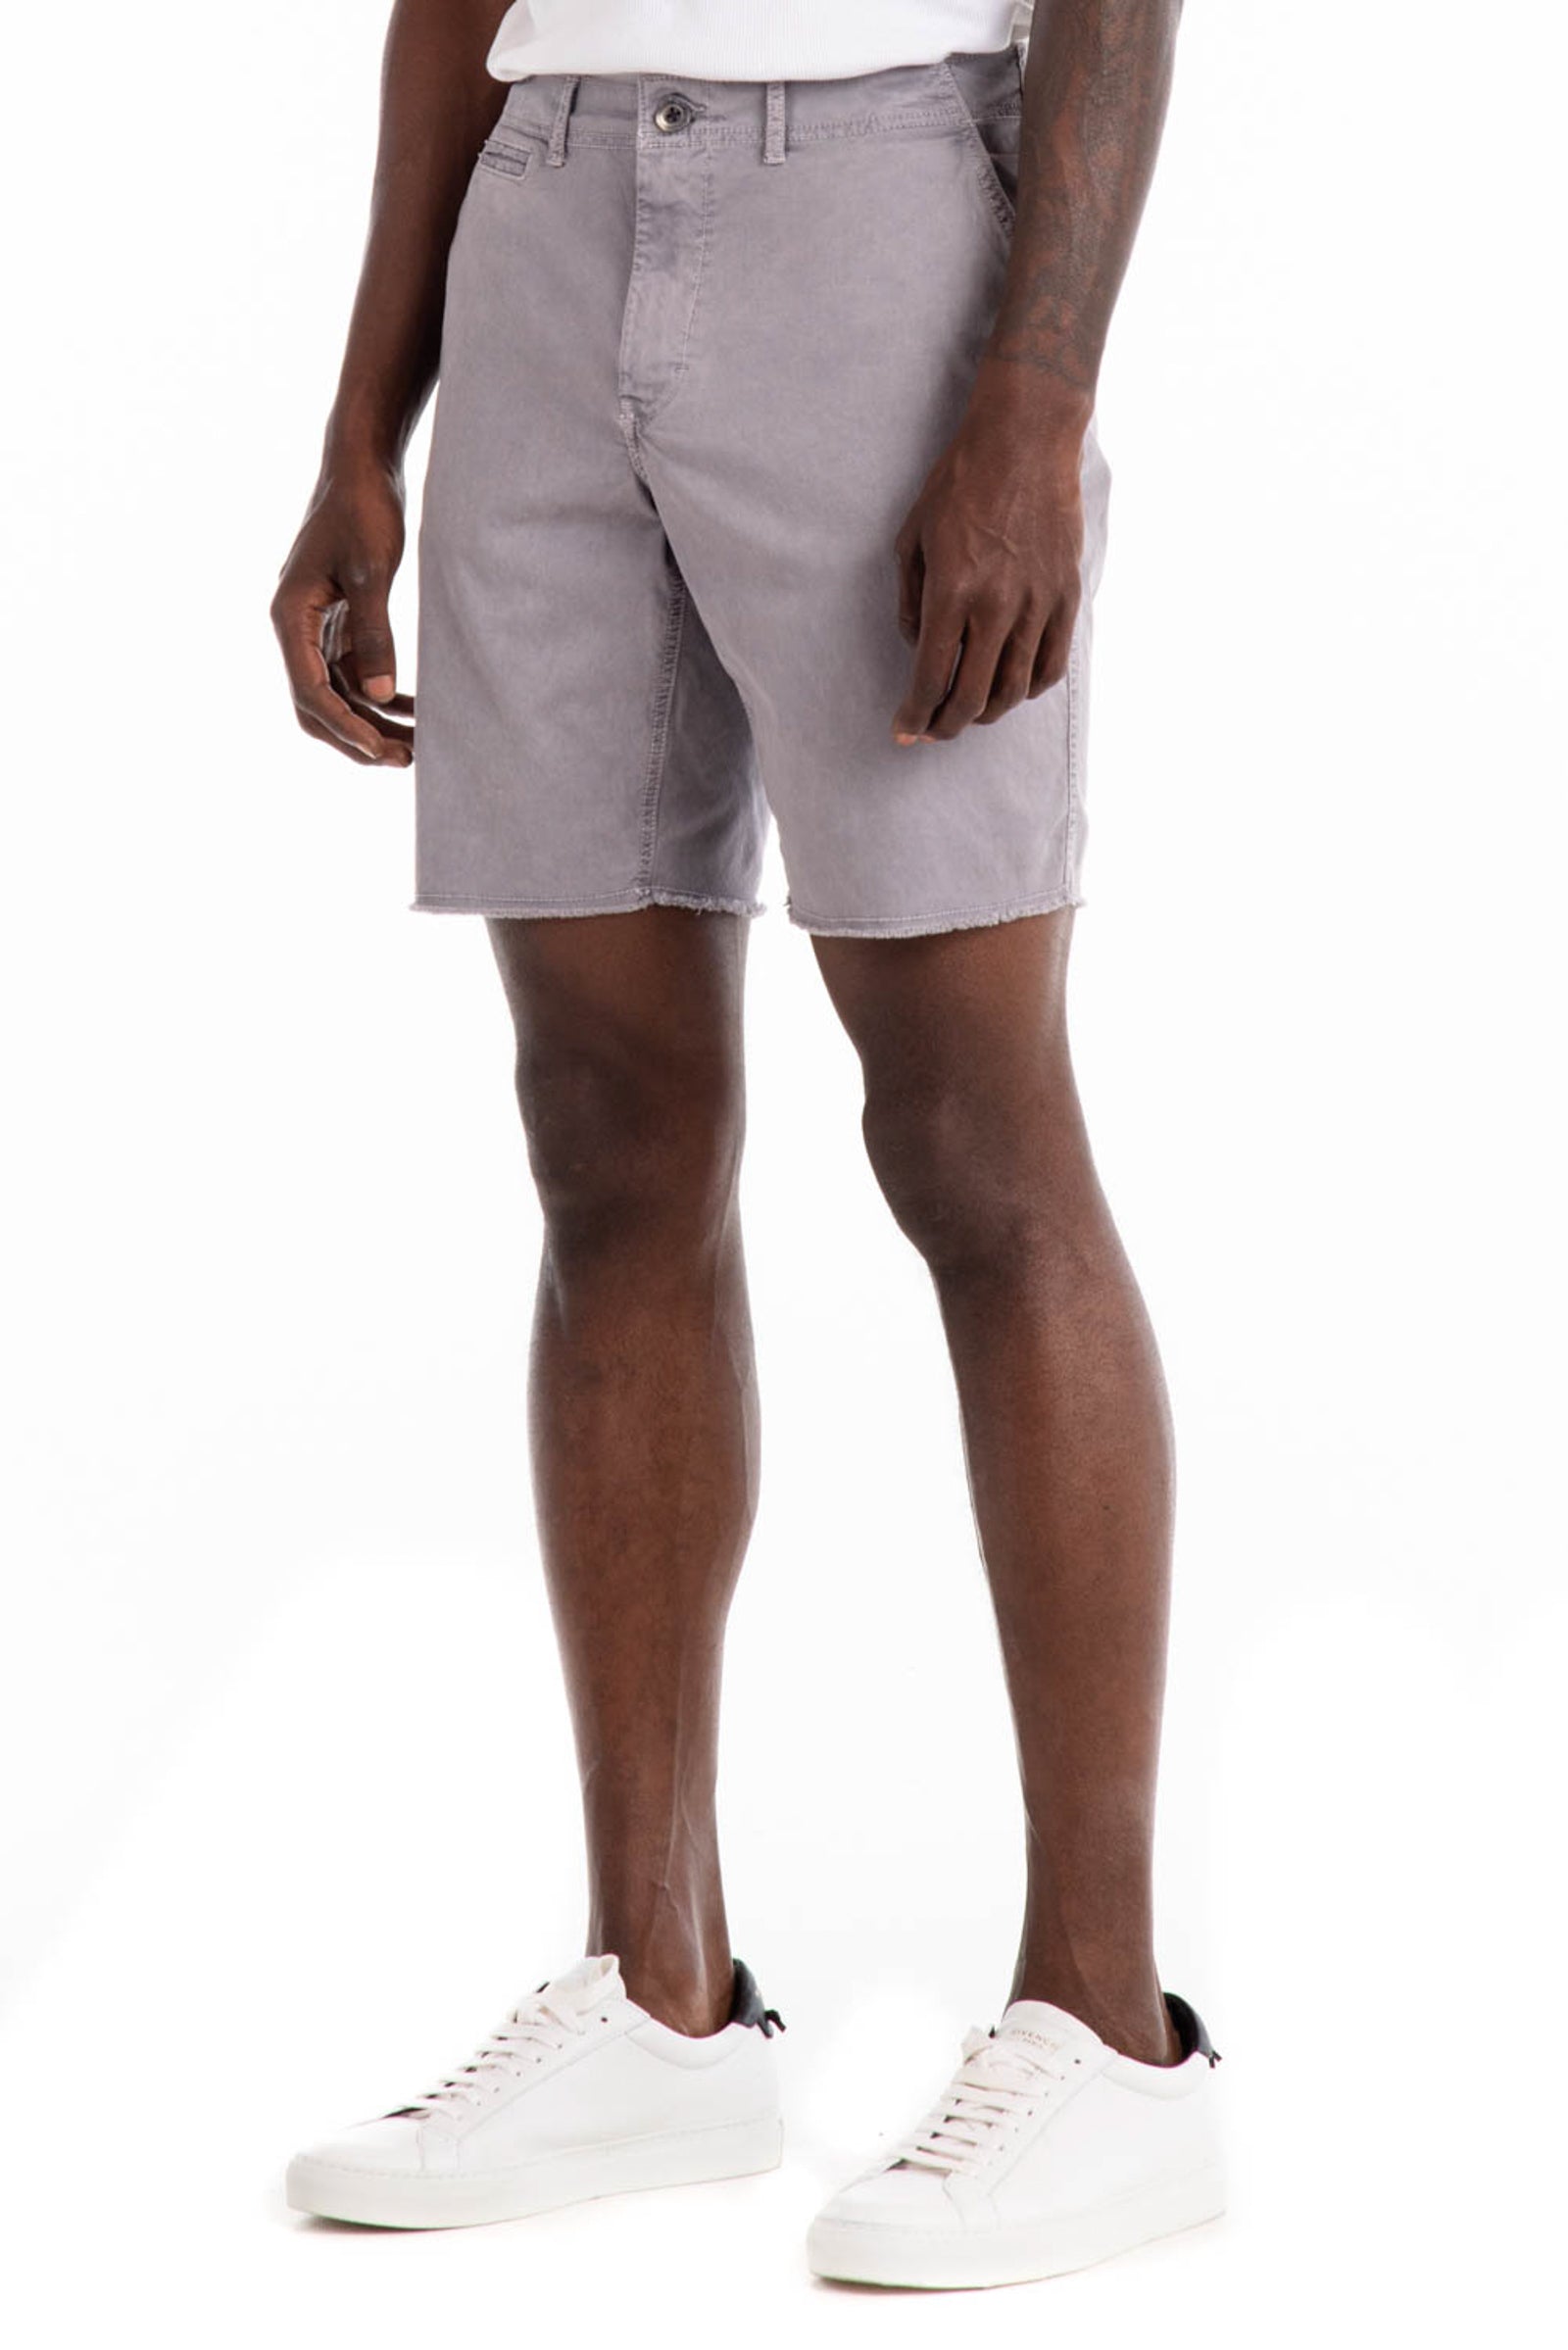 Original Paperbacks Brentwood Chino Short in Light Grey on Model Cropped Side View